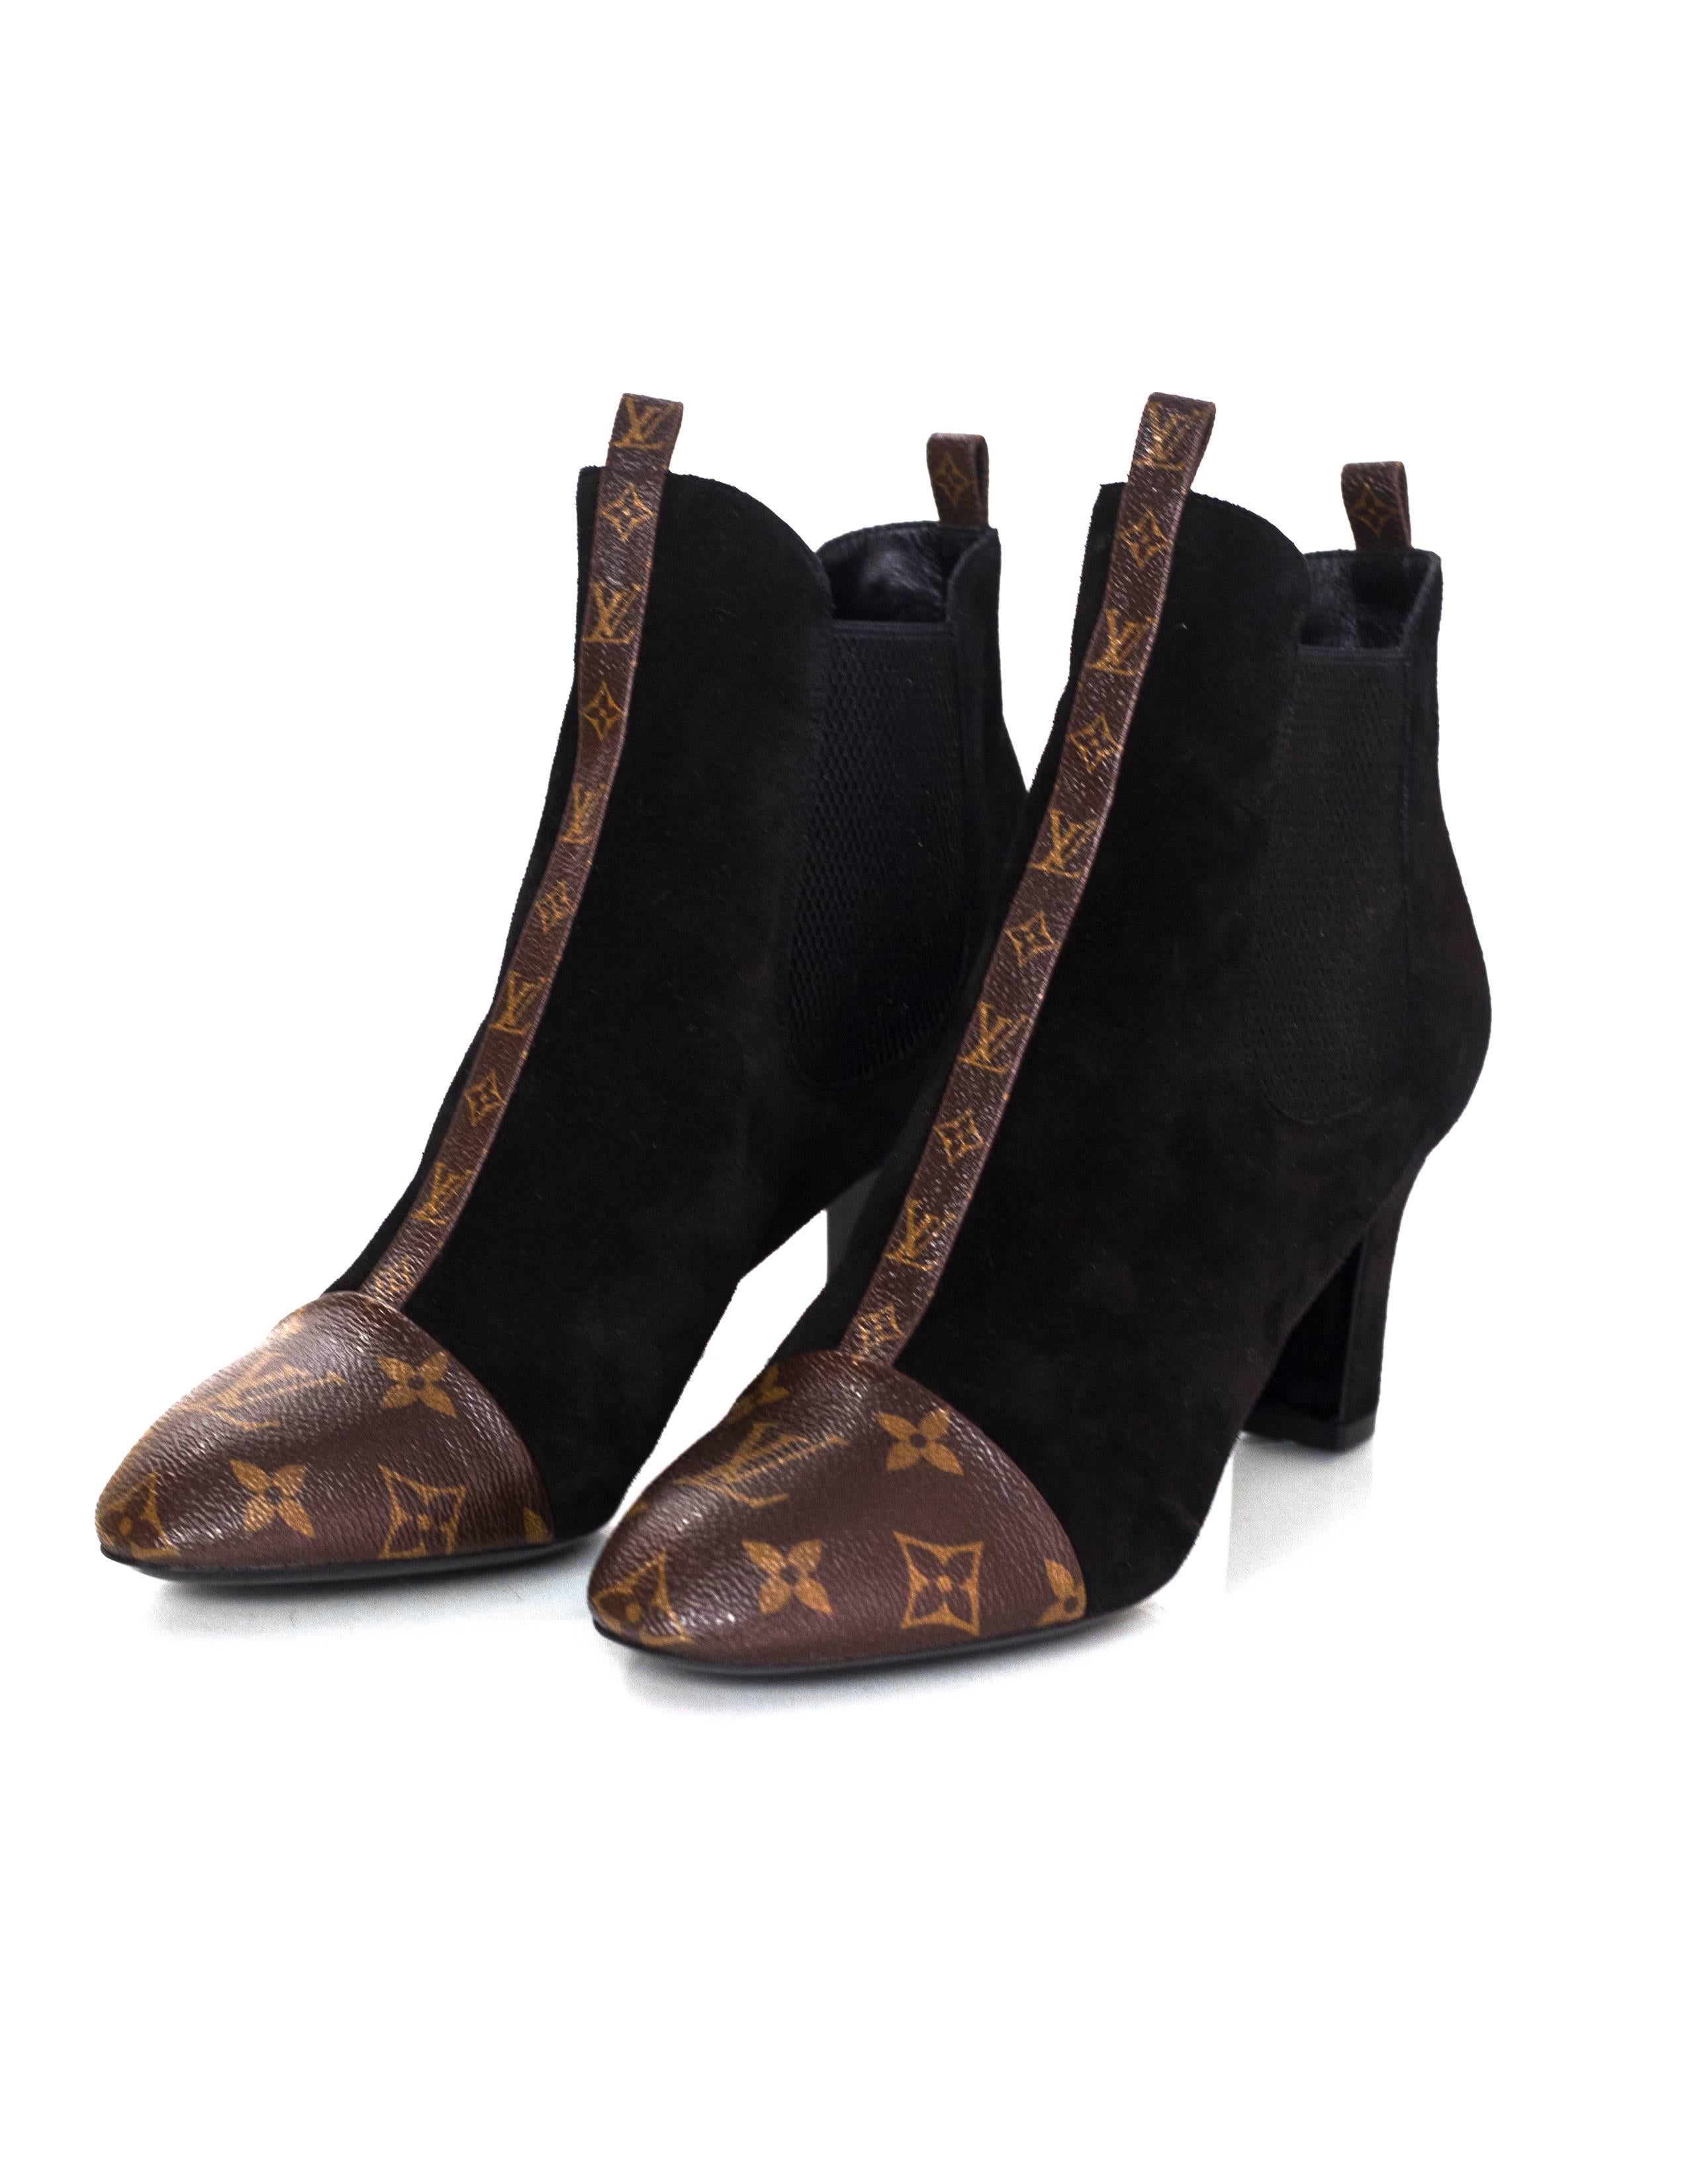 Louis Vuitton Black Suede & Monogram Revival Booties Sz 39.5 NEW

Made In: Italy
Color: Black, brown
Materials: Suede, coated canvas
Closure/Opening: Slide on with stretch sides
Sole Stamp: Made in Italy 39.5 LV
Overall Condition: Excellent